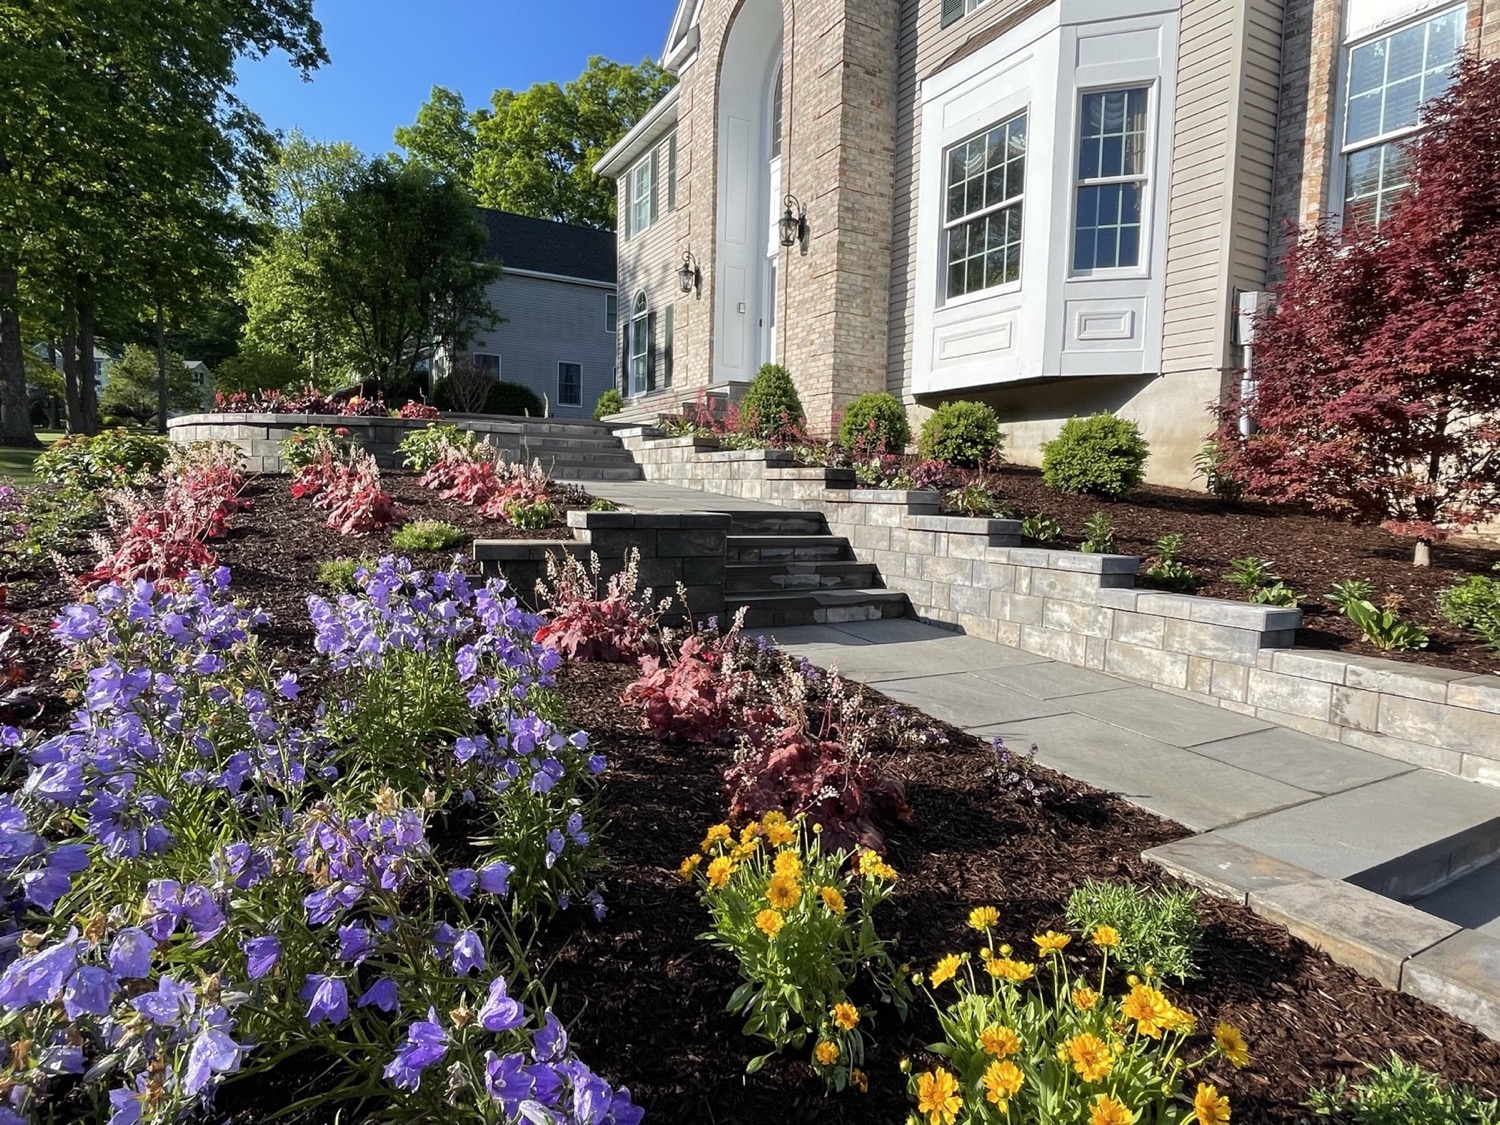 Colorful perennial beds with blue Campanula flowers and yellow Coreopsis leading to a grand home entrance in Rockaway, NJ.